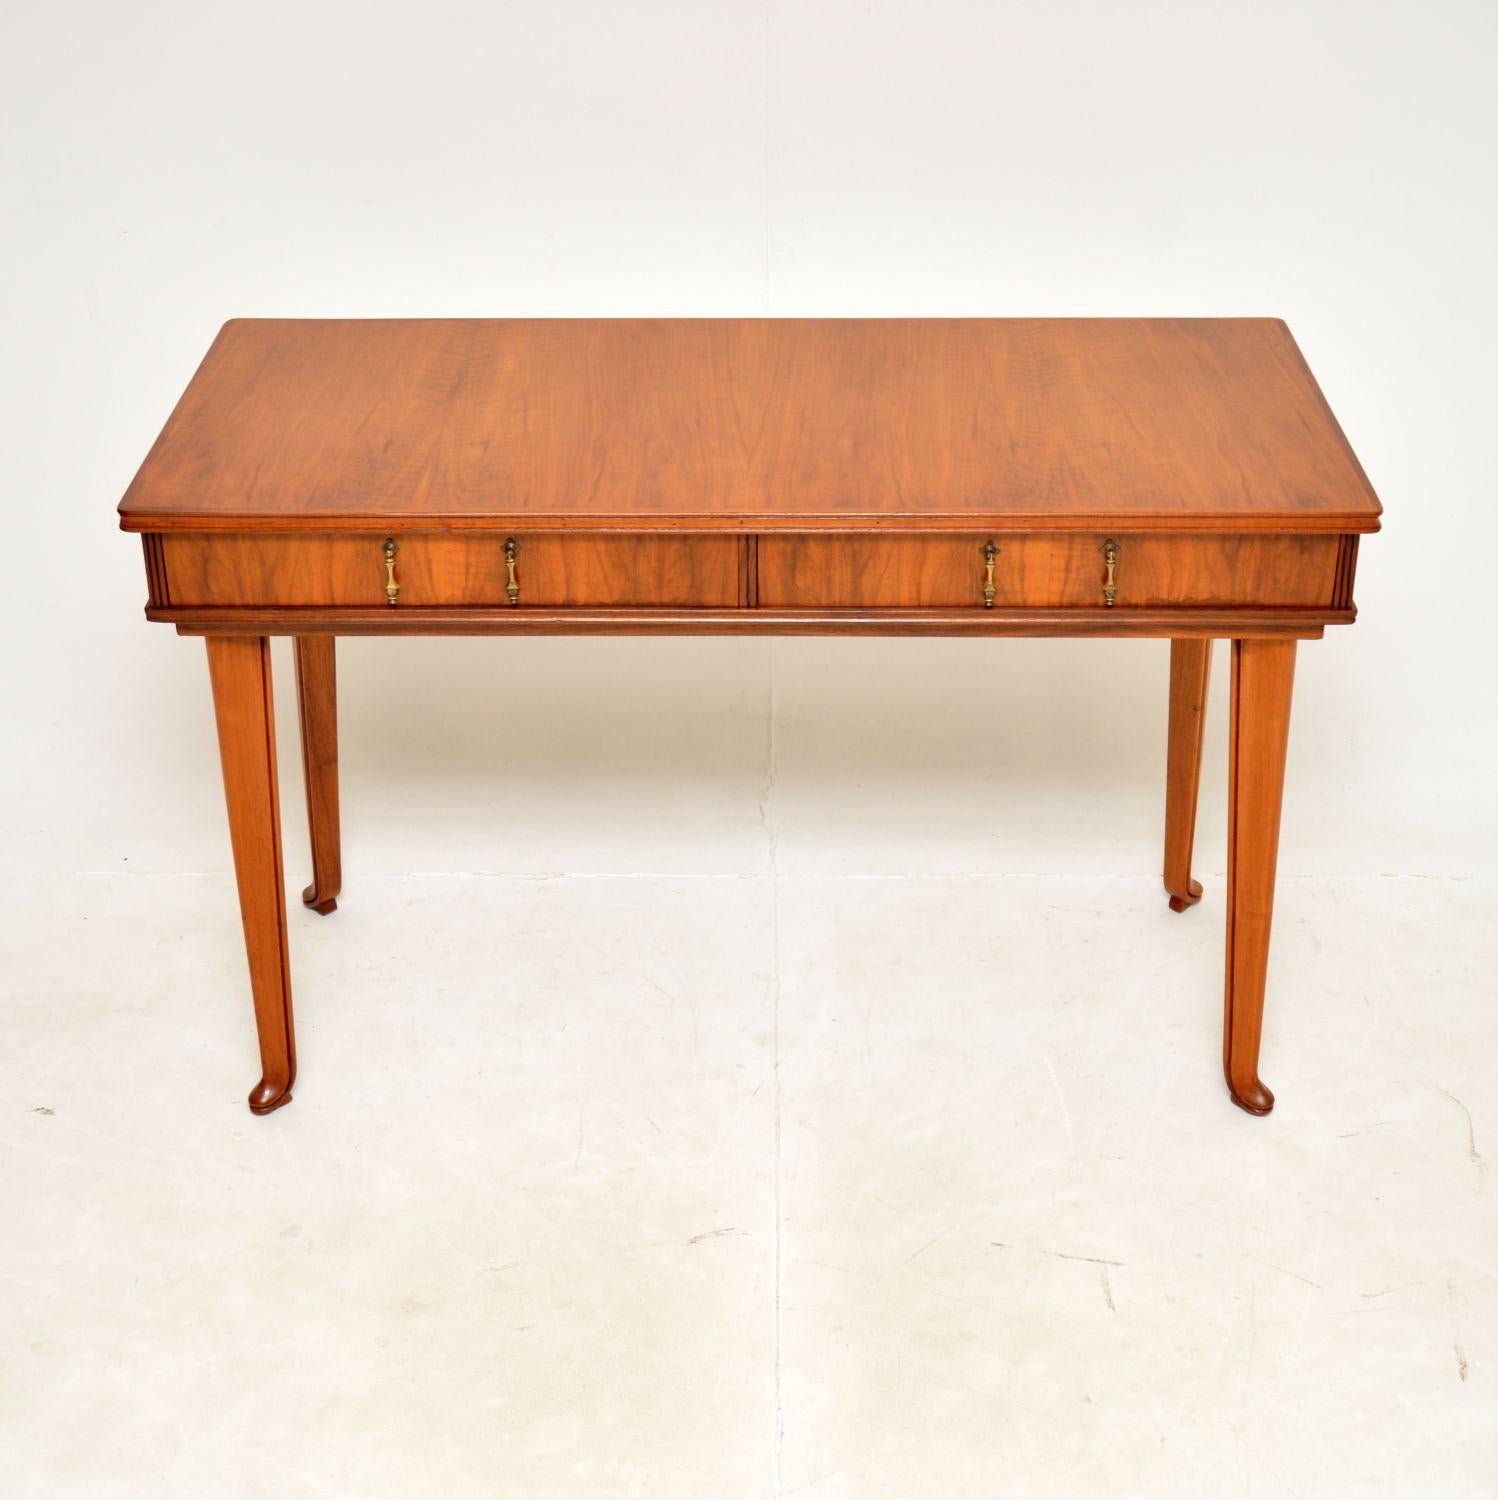 A wonderful vintage walnut desk by the high end cabinet maker Laszlo Hoenig. This was made in England, it dates from the 1950s.

It is of superb quality, with stunning walnut grain patterns and a gorgeous colour tone. The two drawers have beautiful